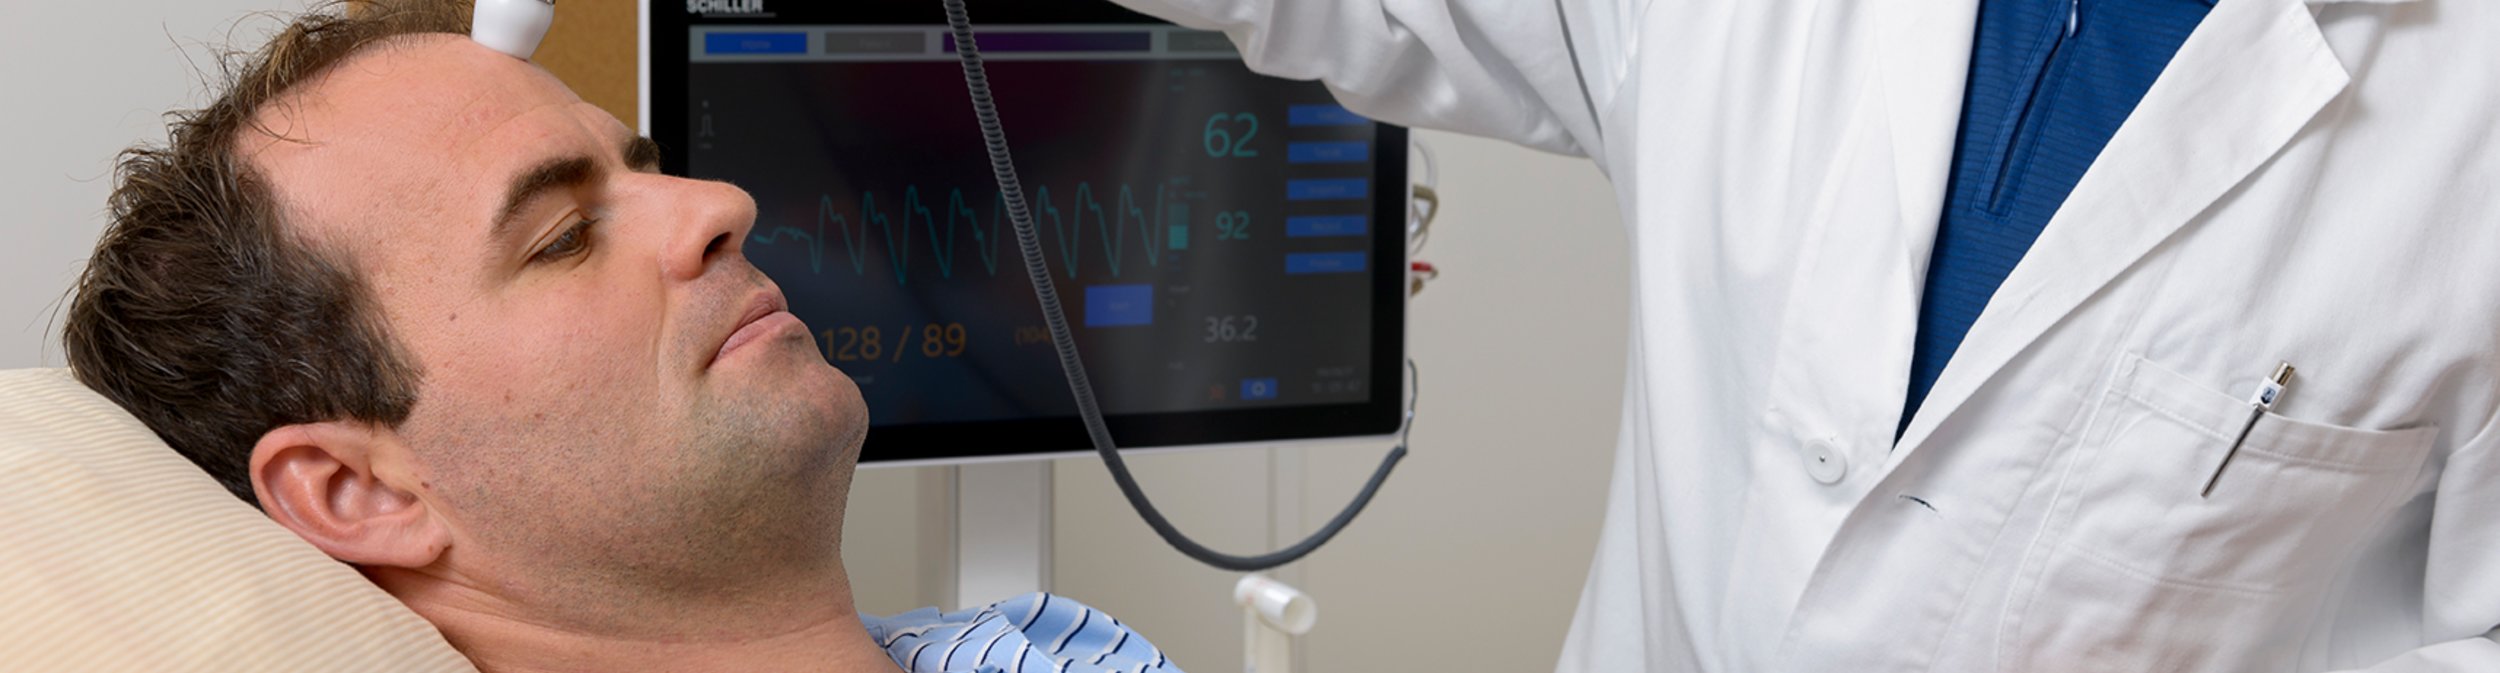 Diagnostic station - main vital signs and physical assessment tools in one device | © SCHILLER